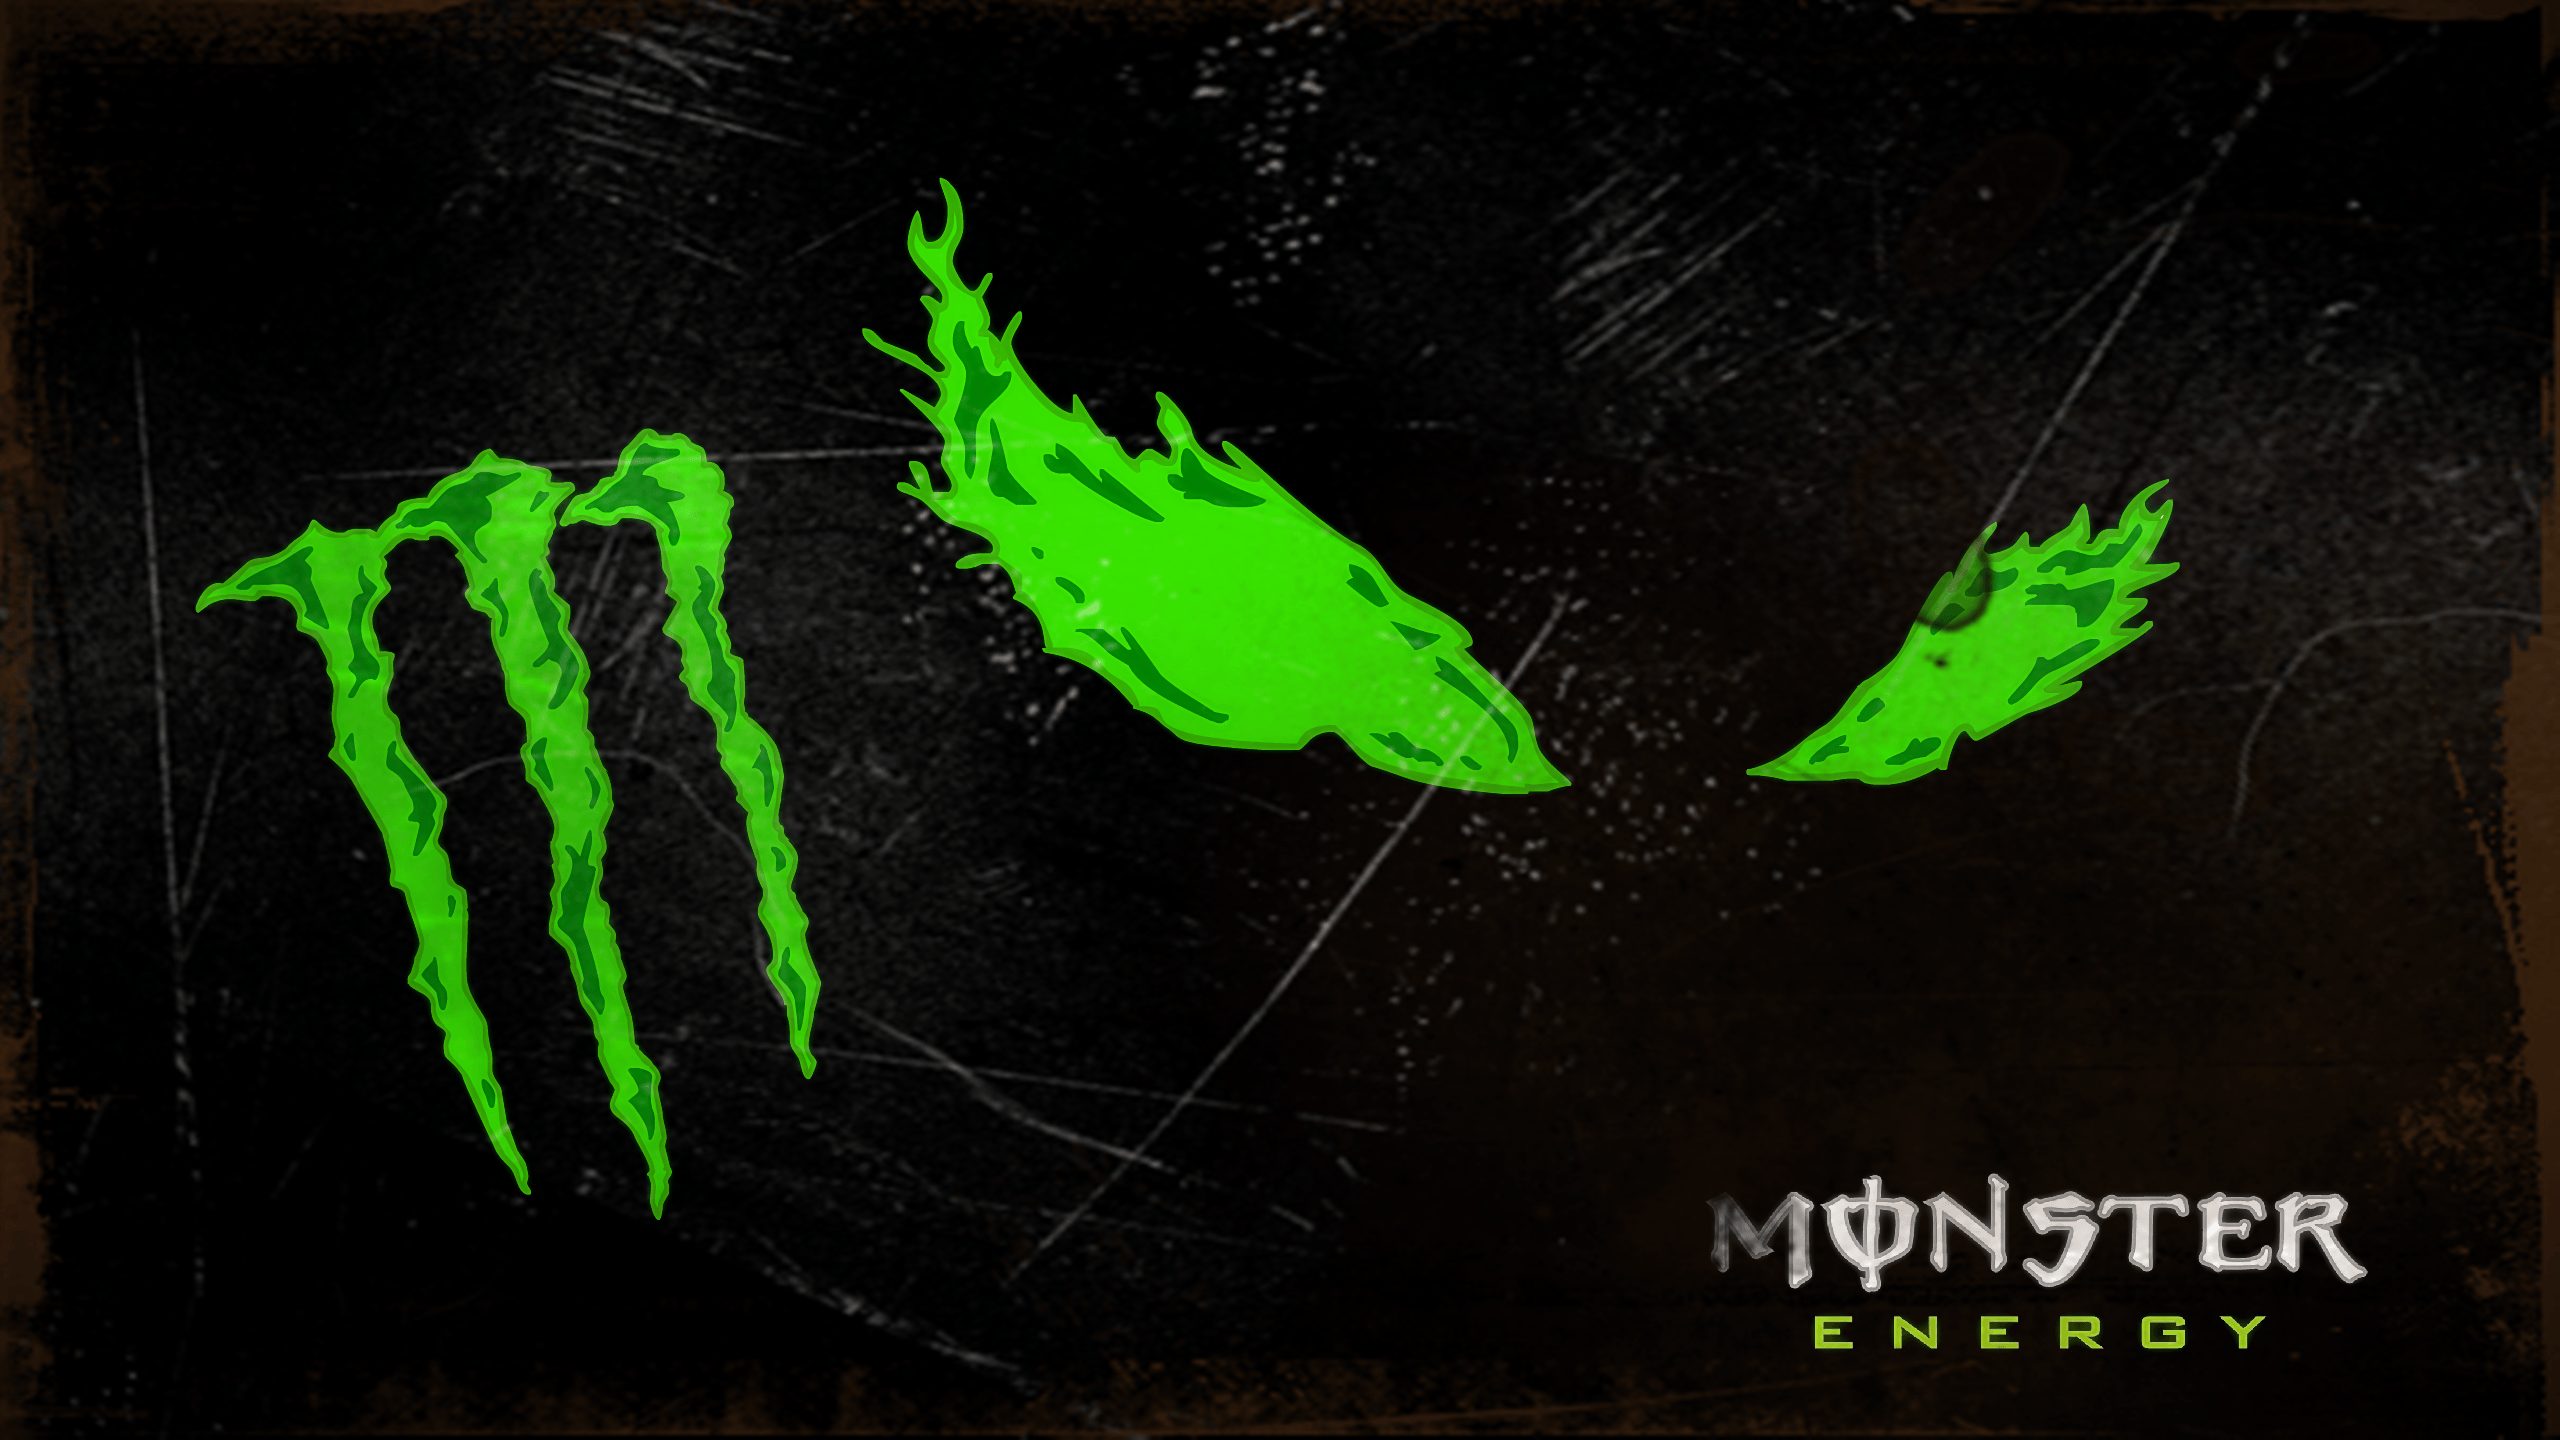 Monster Energy Logo Wallpapers Image Wallpapers.